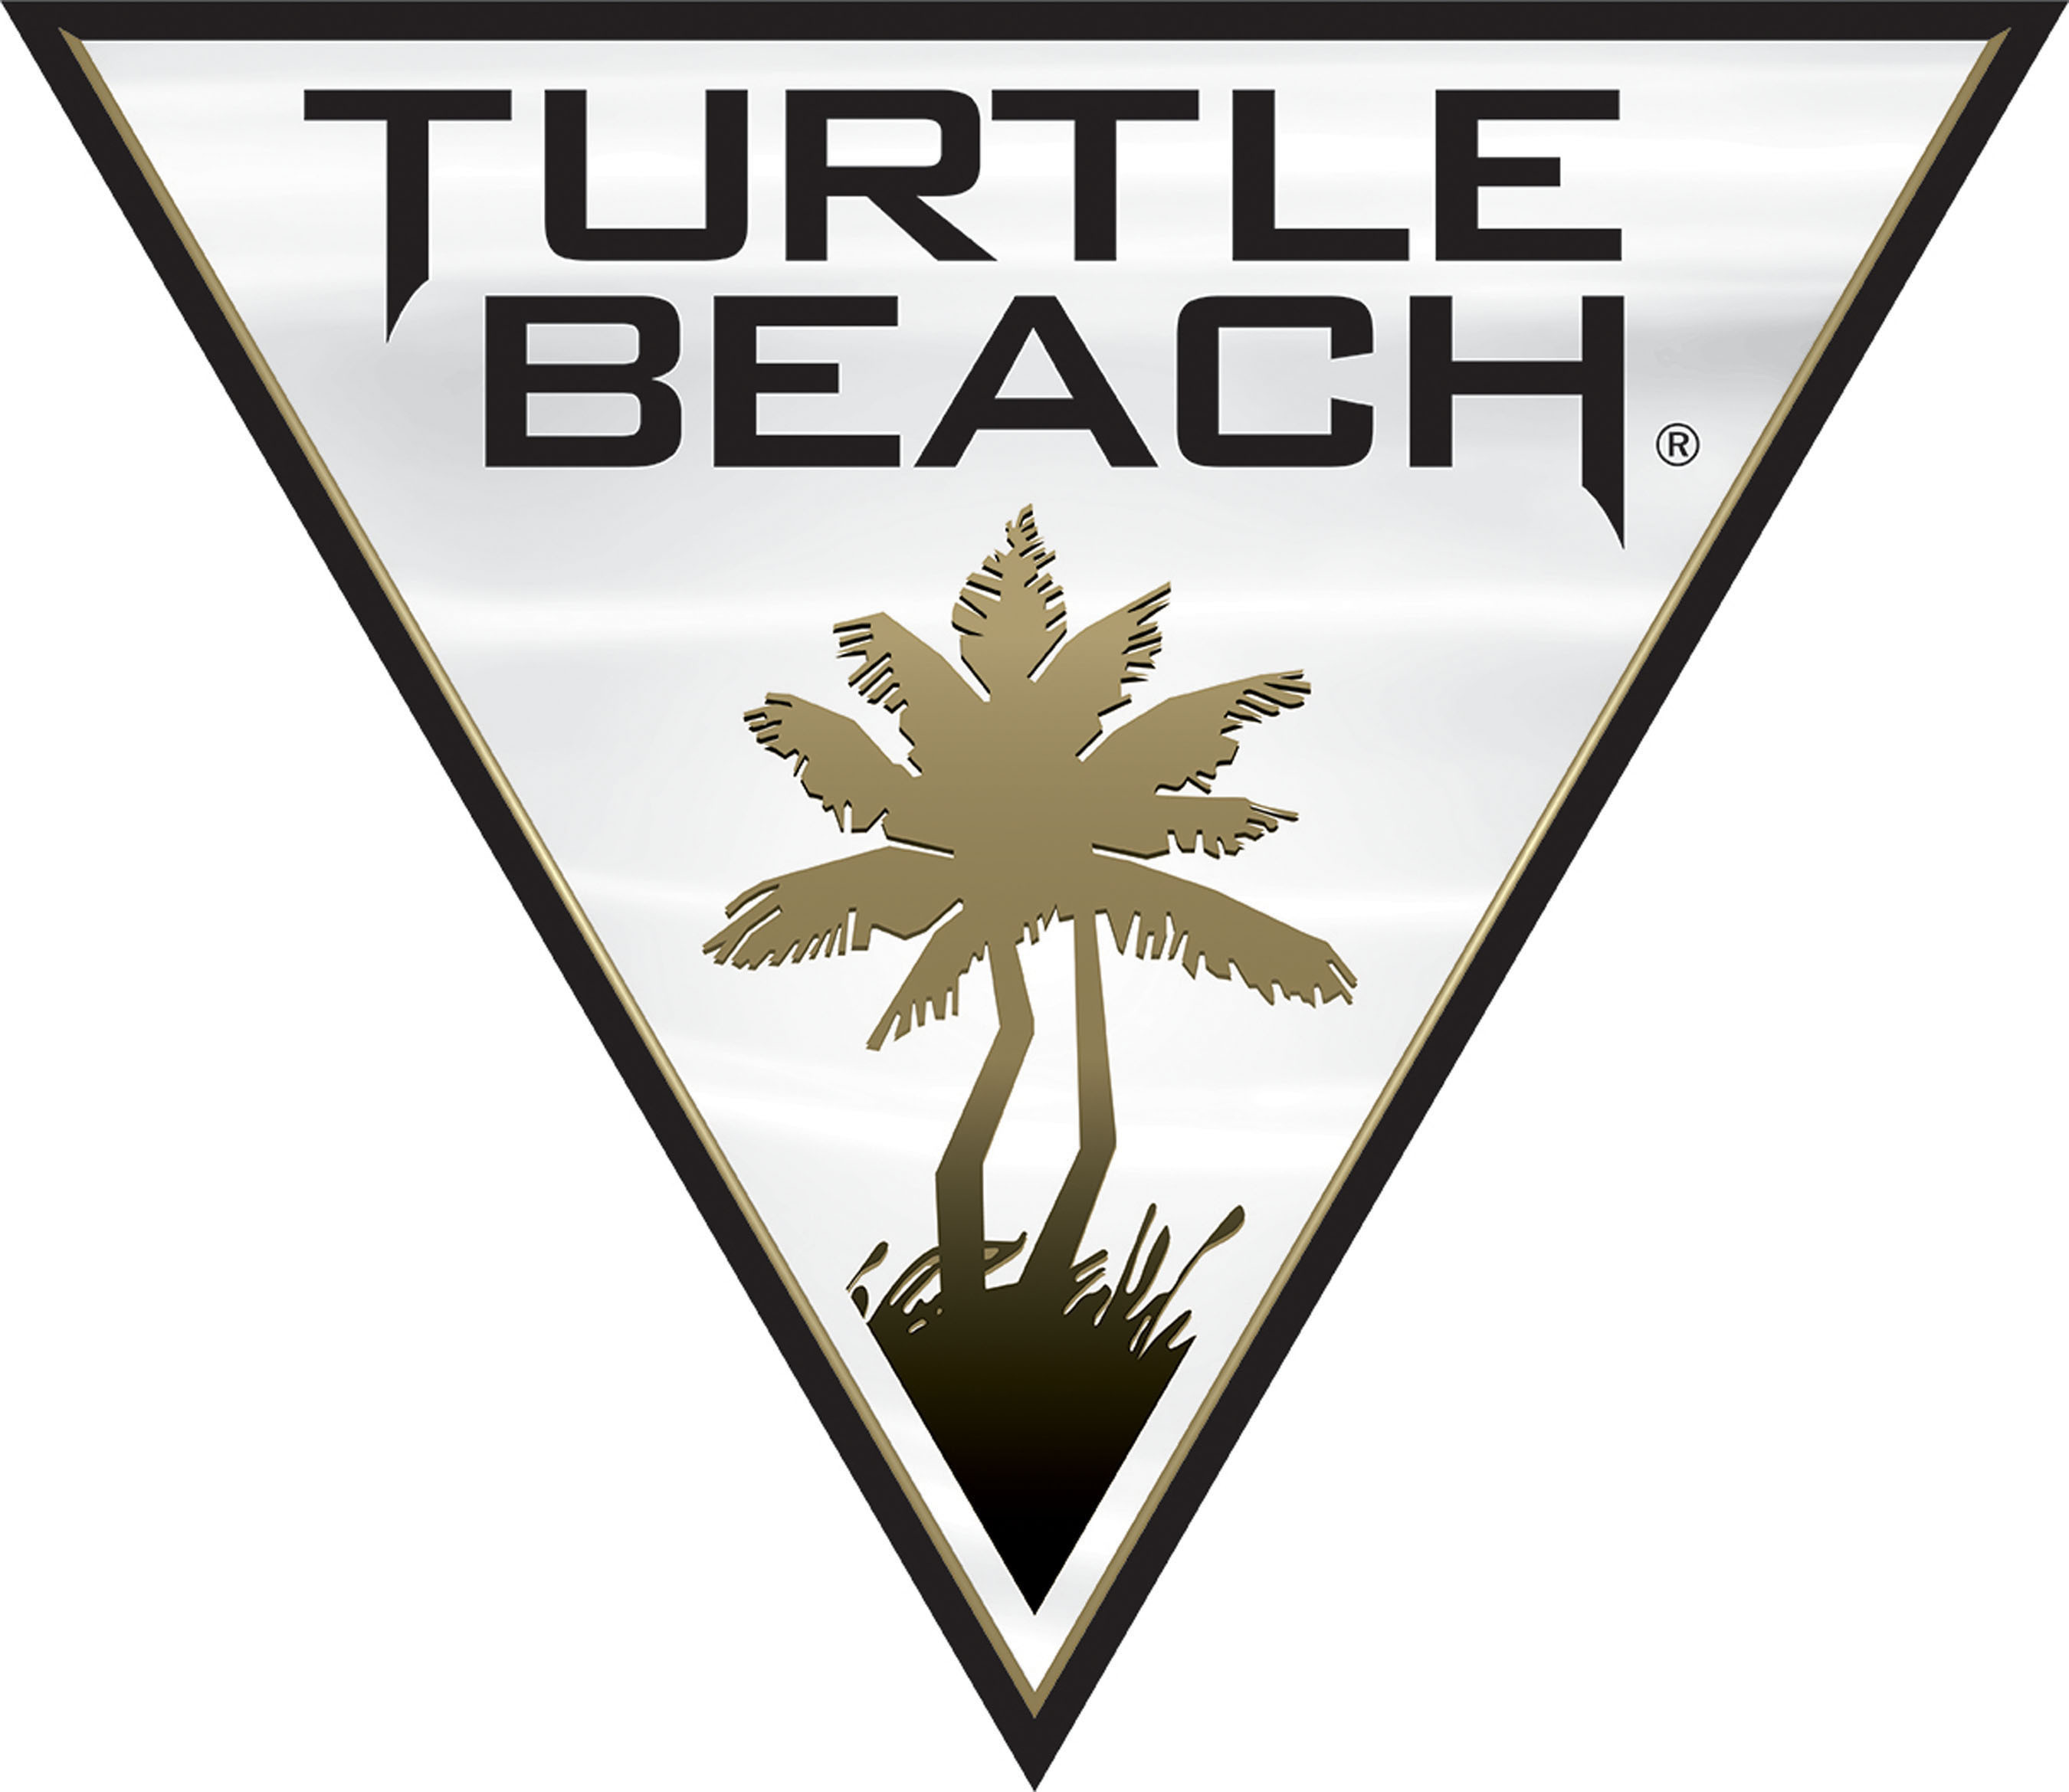 Turtle Beach Corporation's New PC Gaming Accessories Now Available At Retail